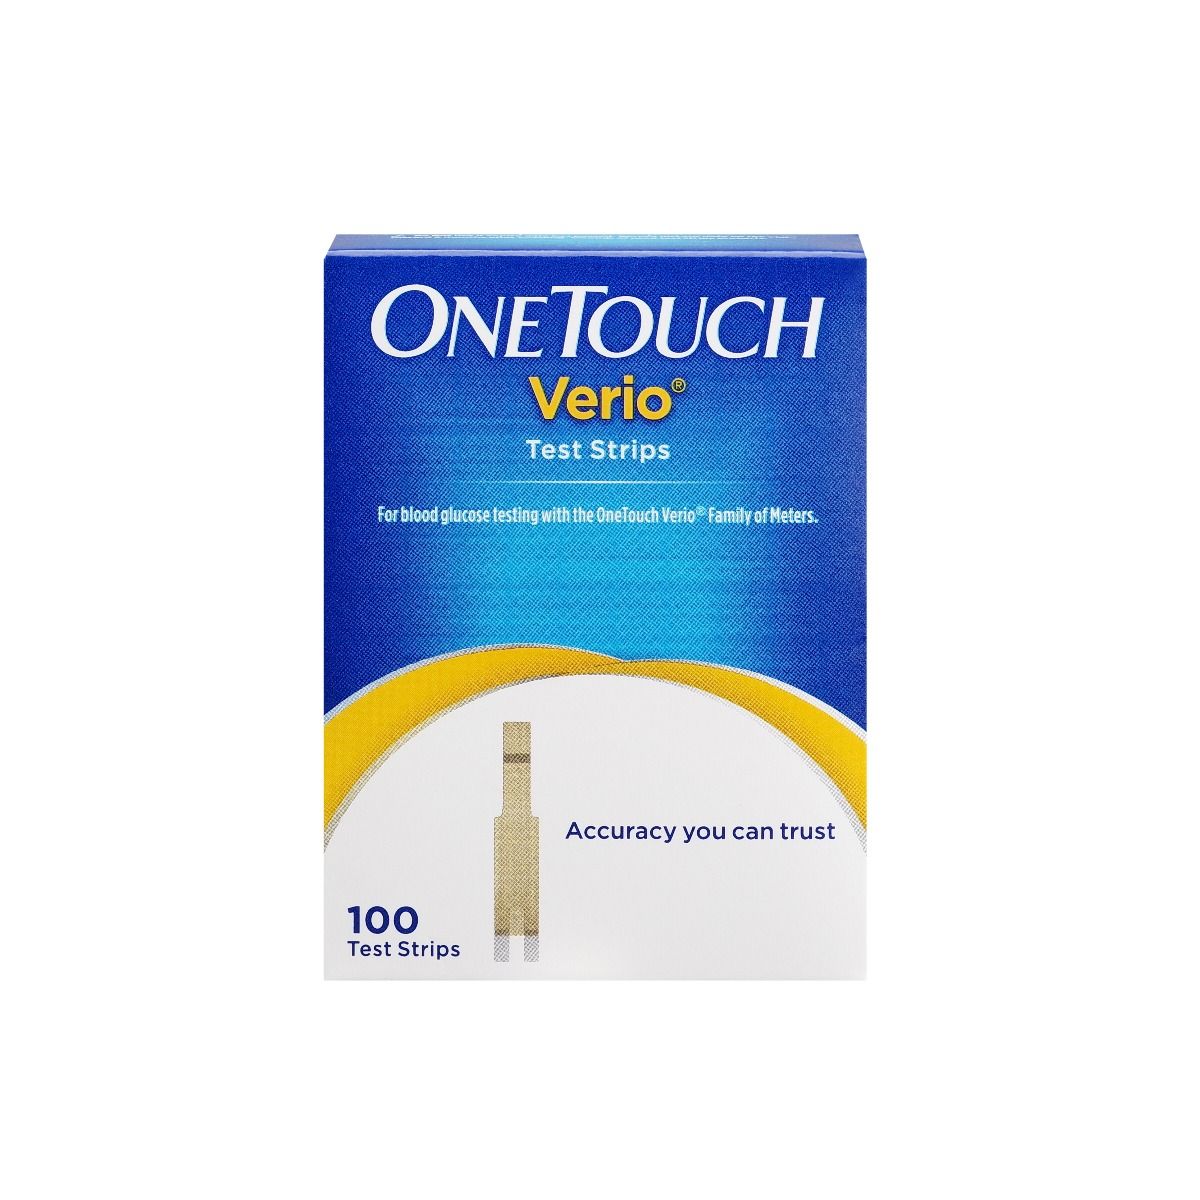 OneTouch Verio Test Strips, 100 Count, Pack of 1 